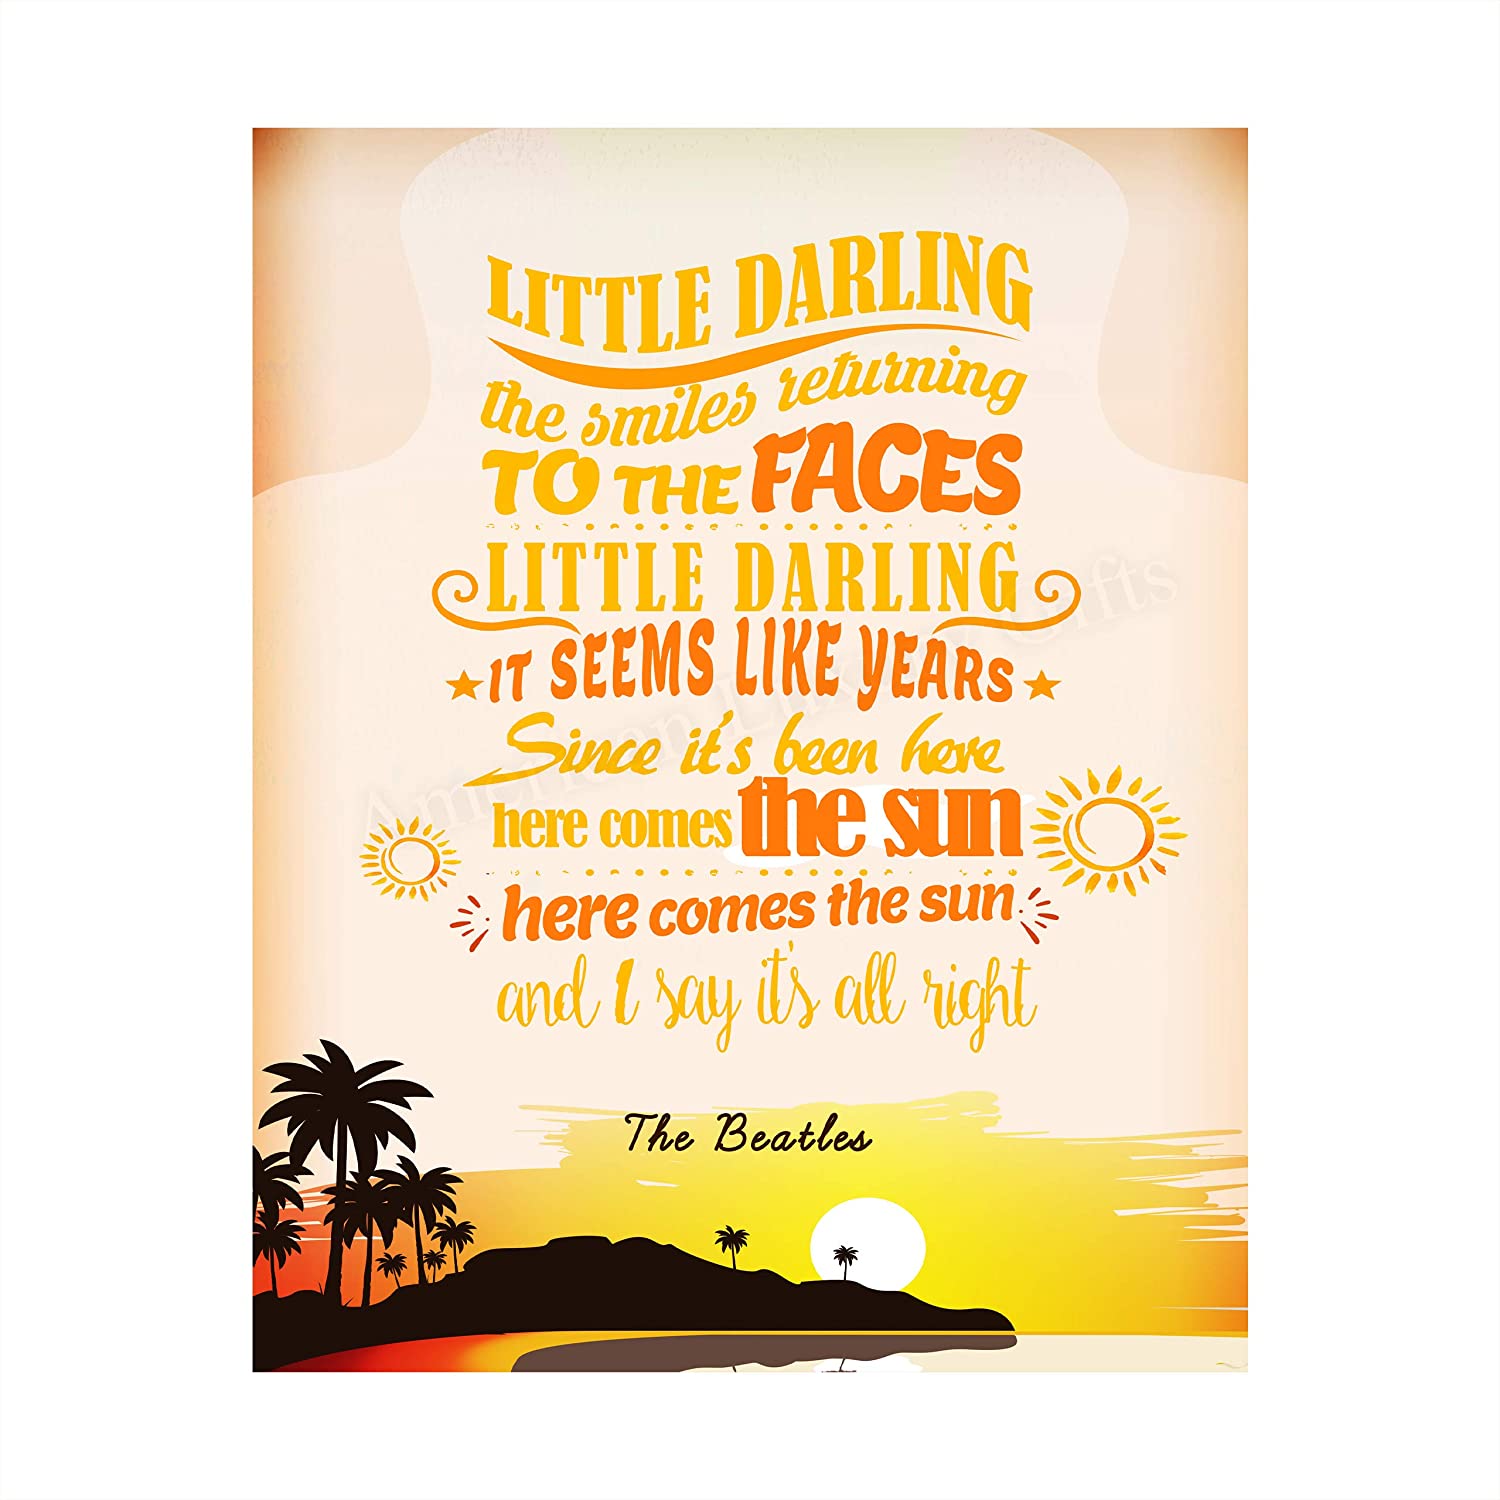 The Beatles Here Comes The Sun Song Lyrics Art 8 X 10 Wall Print Ready To Frame. Vintage Music Poster Print With Sunset Silhouette Image. Home Office Studio Cave Decor. Perfect For Beatles Fans!, Handmade Products